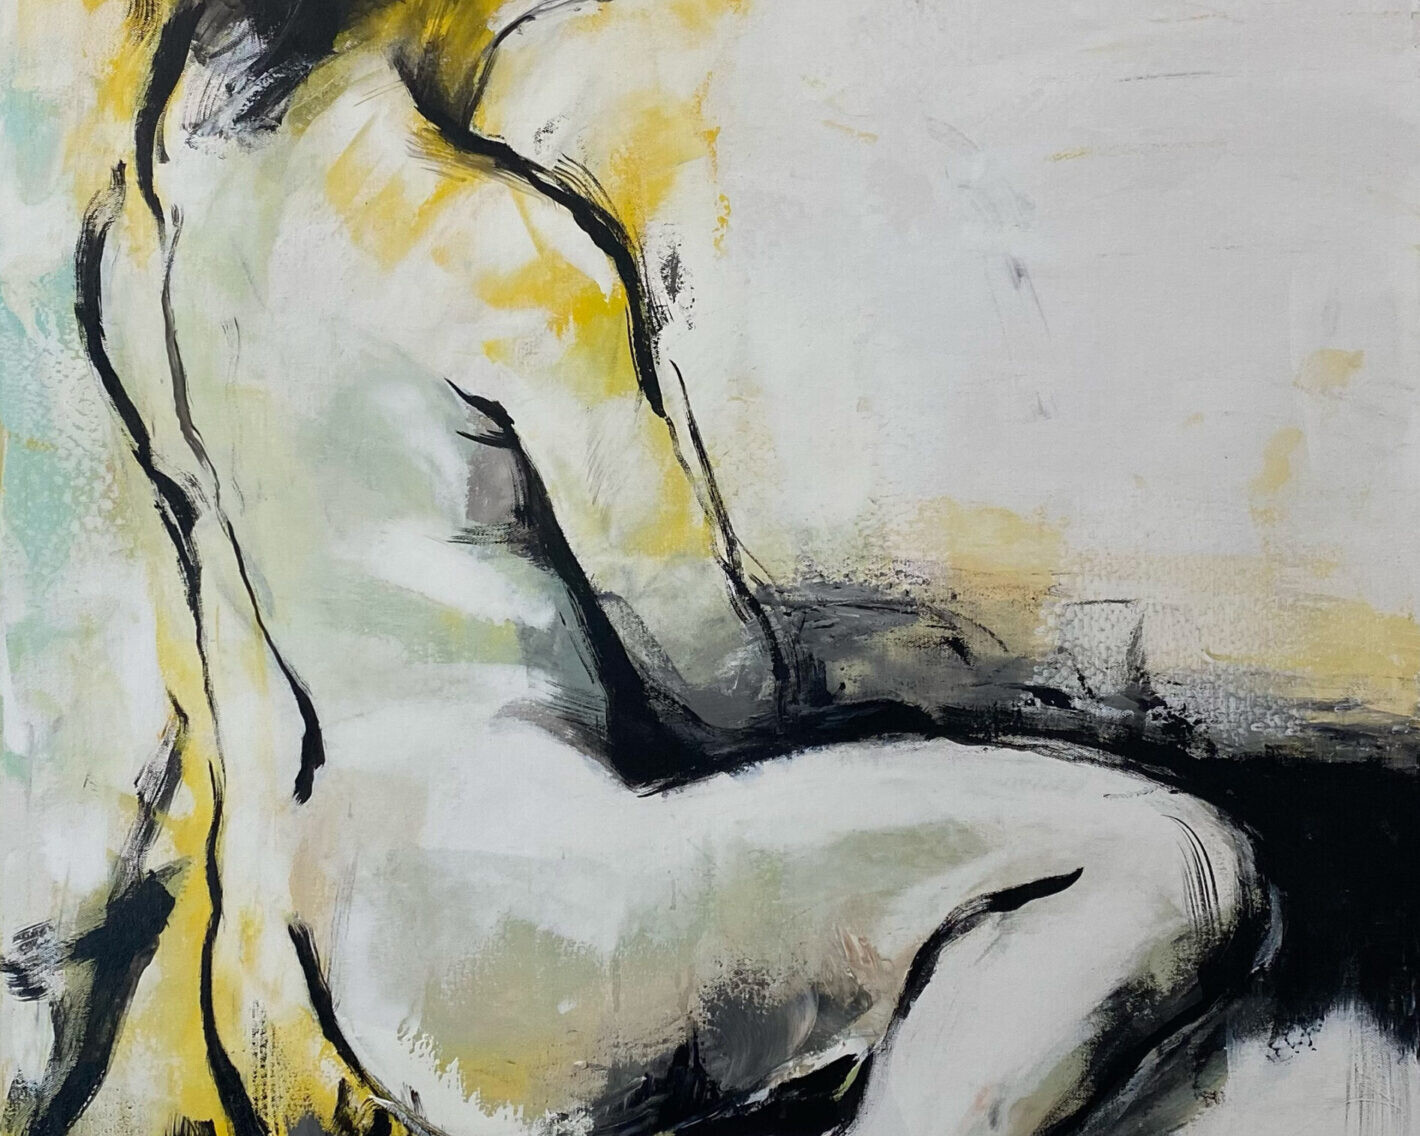 Image of a painting depicting a raw and sensual female nude, with bold strokes and lines capturing her essence with confidence and sophistication